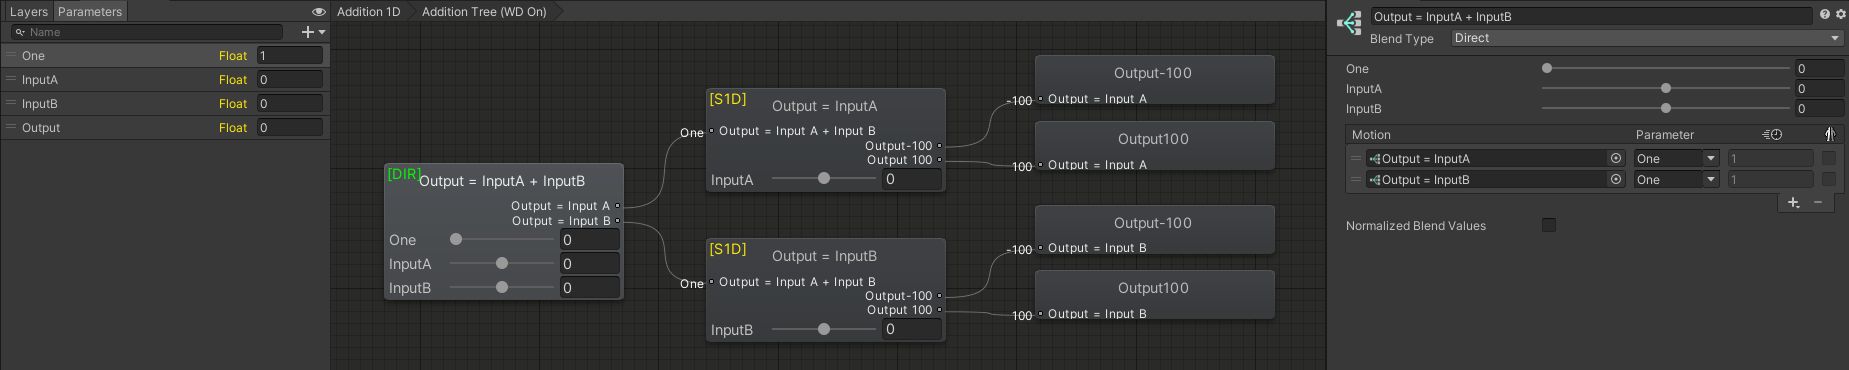 An example of adding two values by animating the Output AAP in two 1D Blend Trees in a Direct Blend Tree.